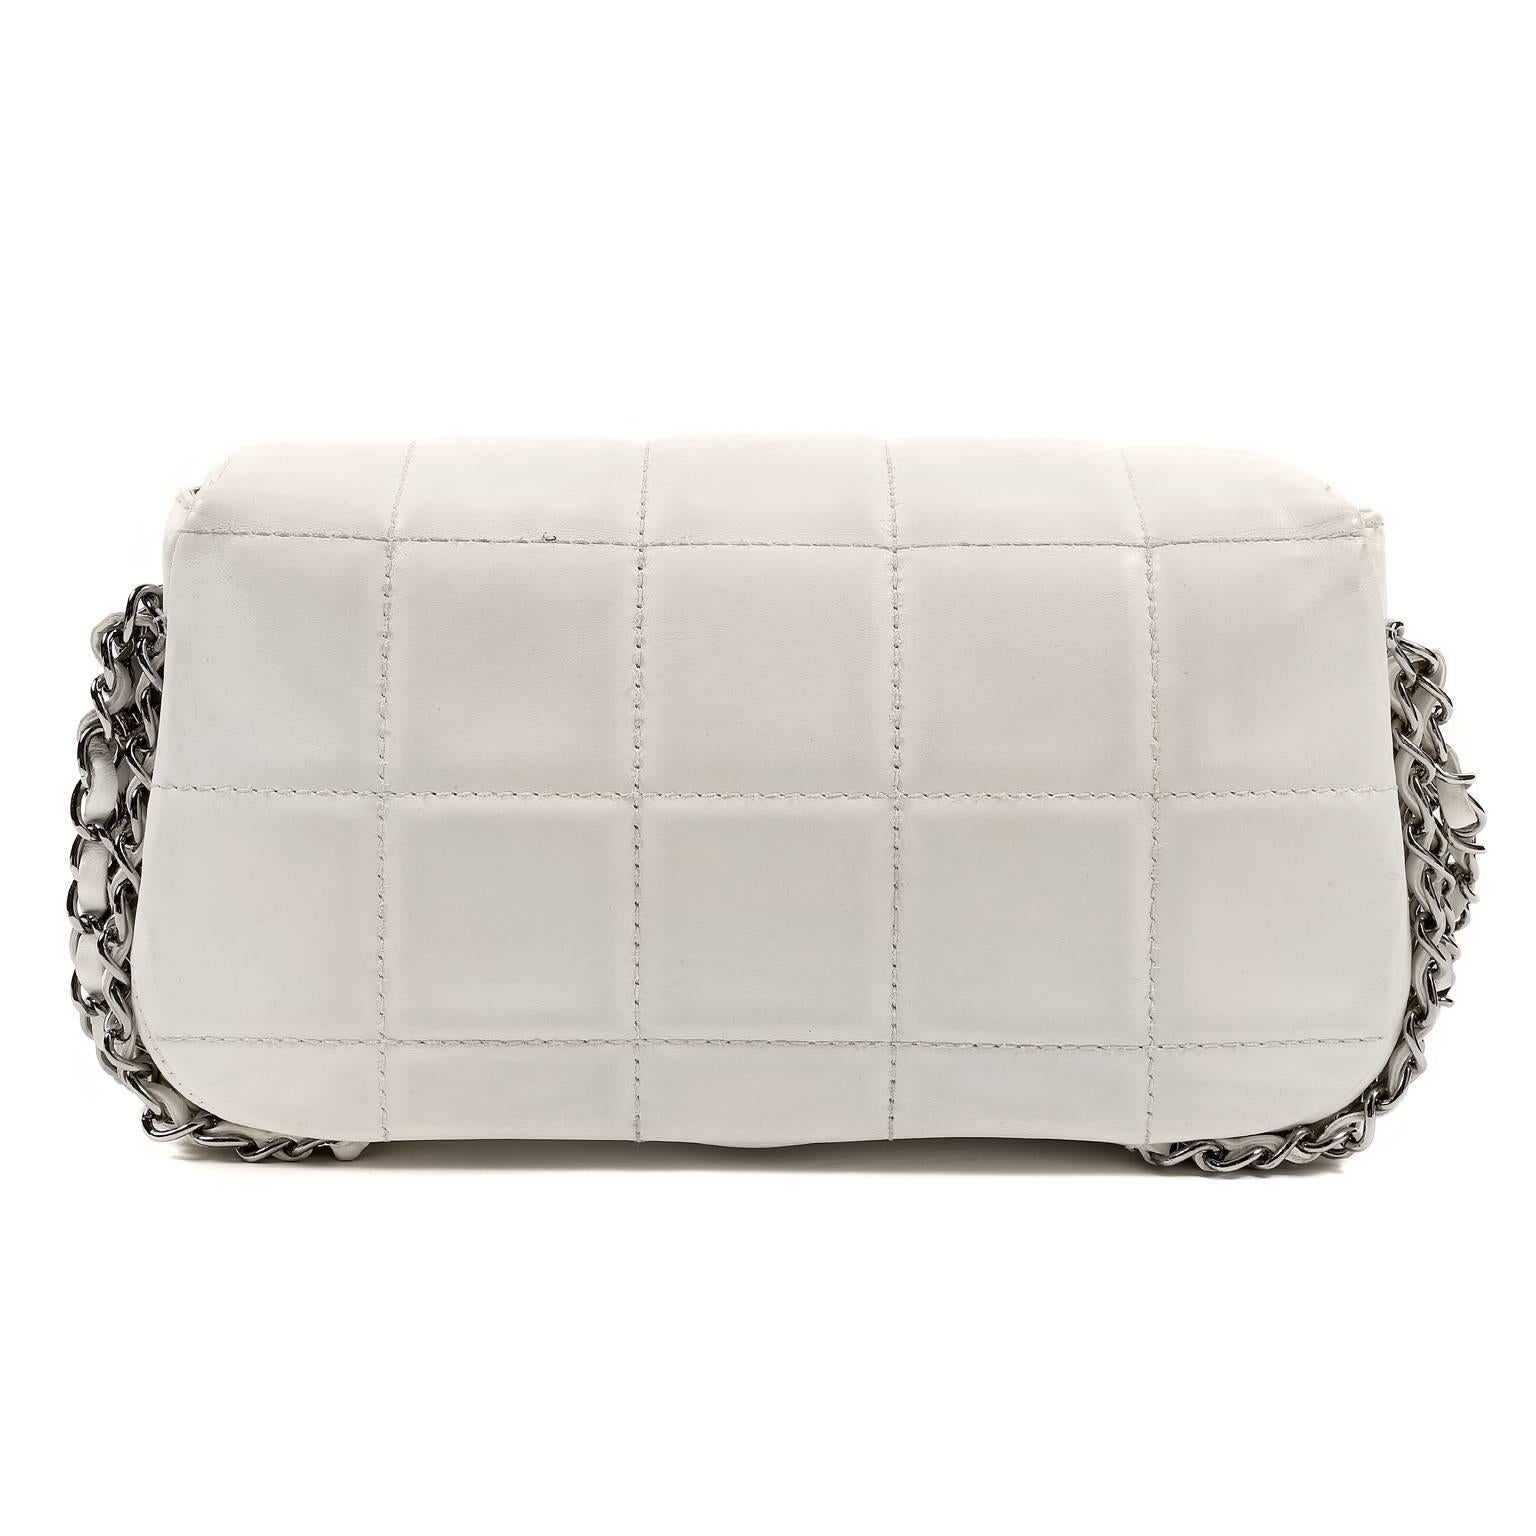 Chanel White Multi Chain Classic Flap is a special edition runway piece in excellent condition.  Edgy chain details combine with classic Chanel design elements for a spectacular collectible piece.
 
White leather is quilted in Hershey square